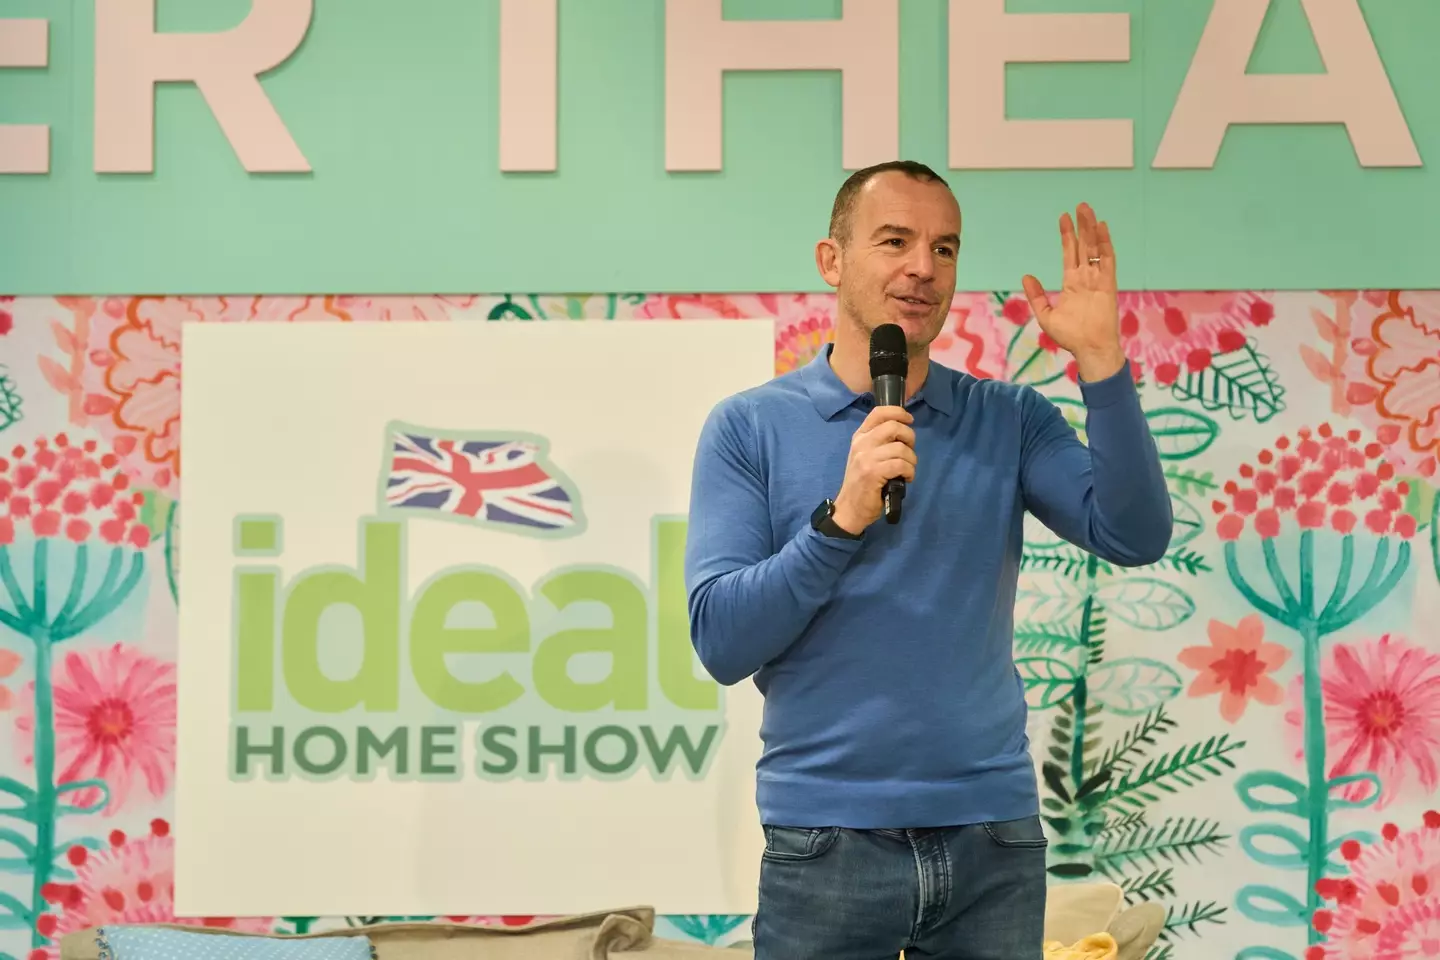 Martin Lewis was speaking at the Ideal Home Show at Olympia London.